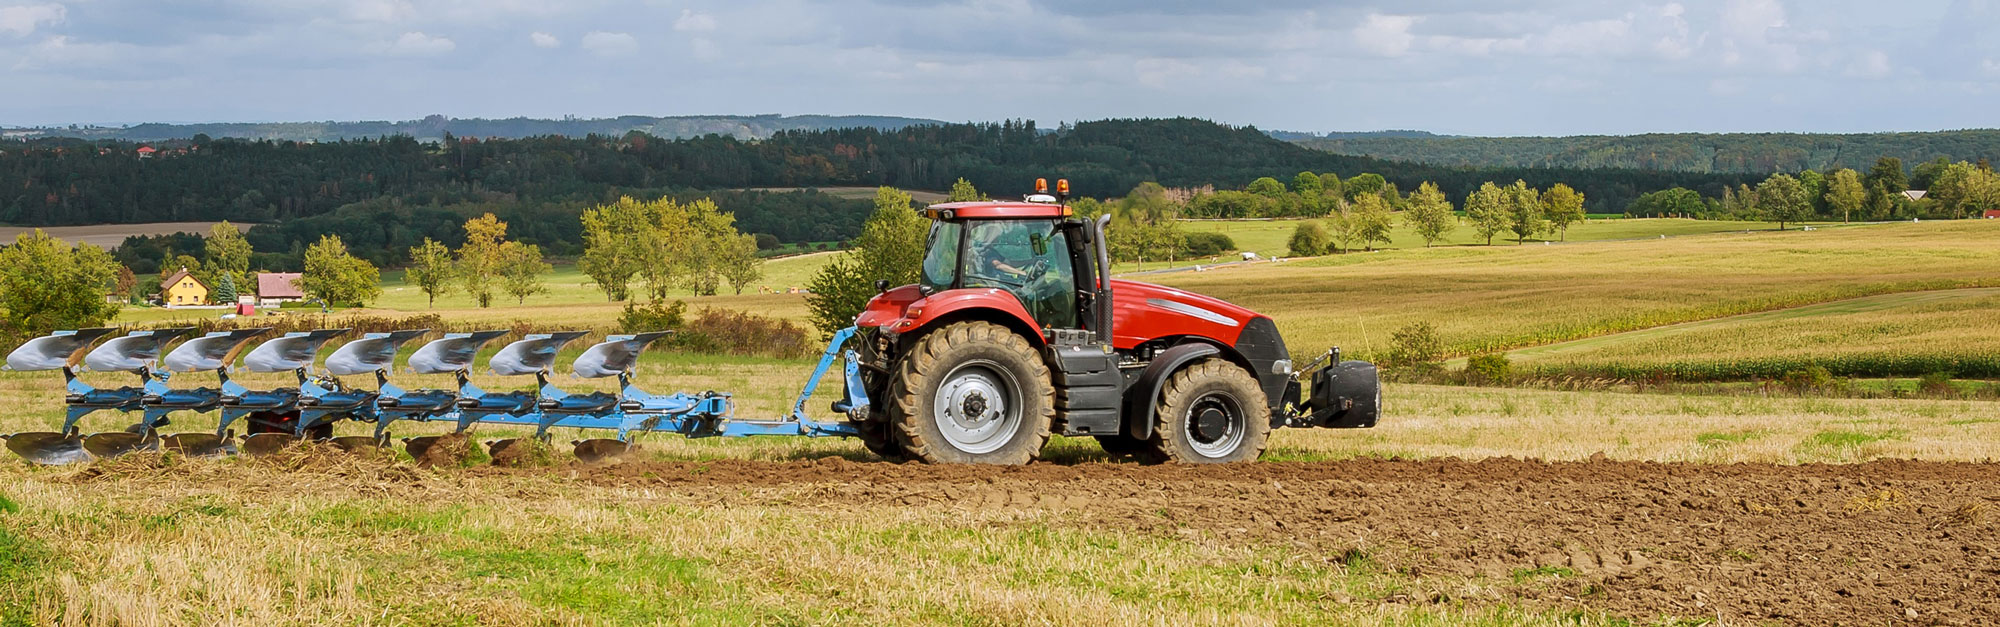 Farmer in red tractor preparing land with plow for sowing